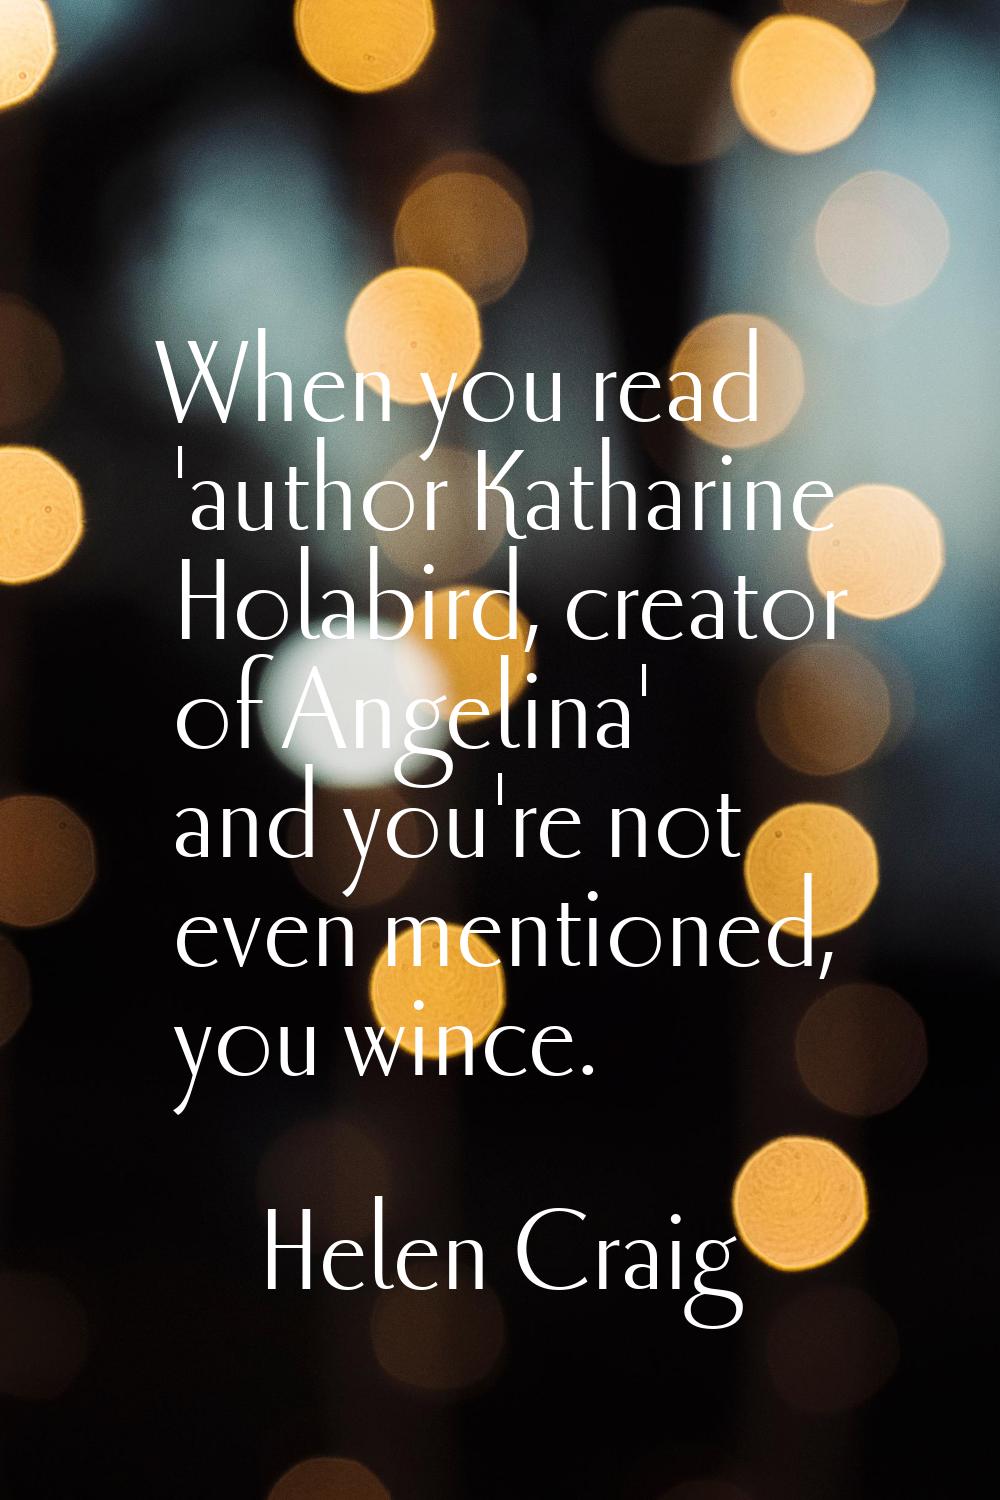 When you read 'author Katharine Holabird, creator of Angelina' and you're not even mentioned, you w